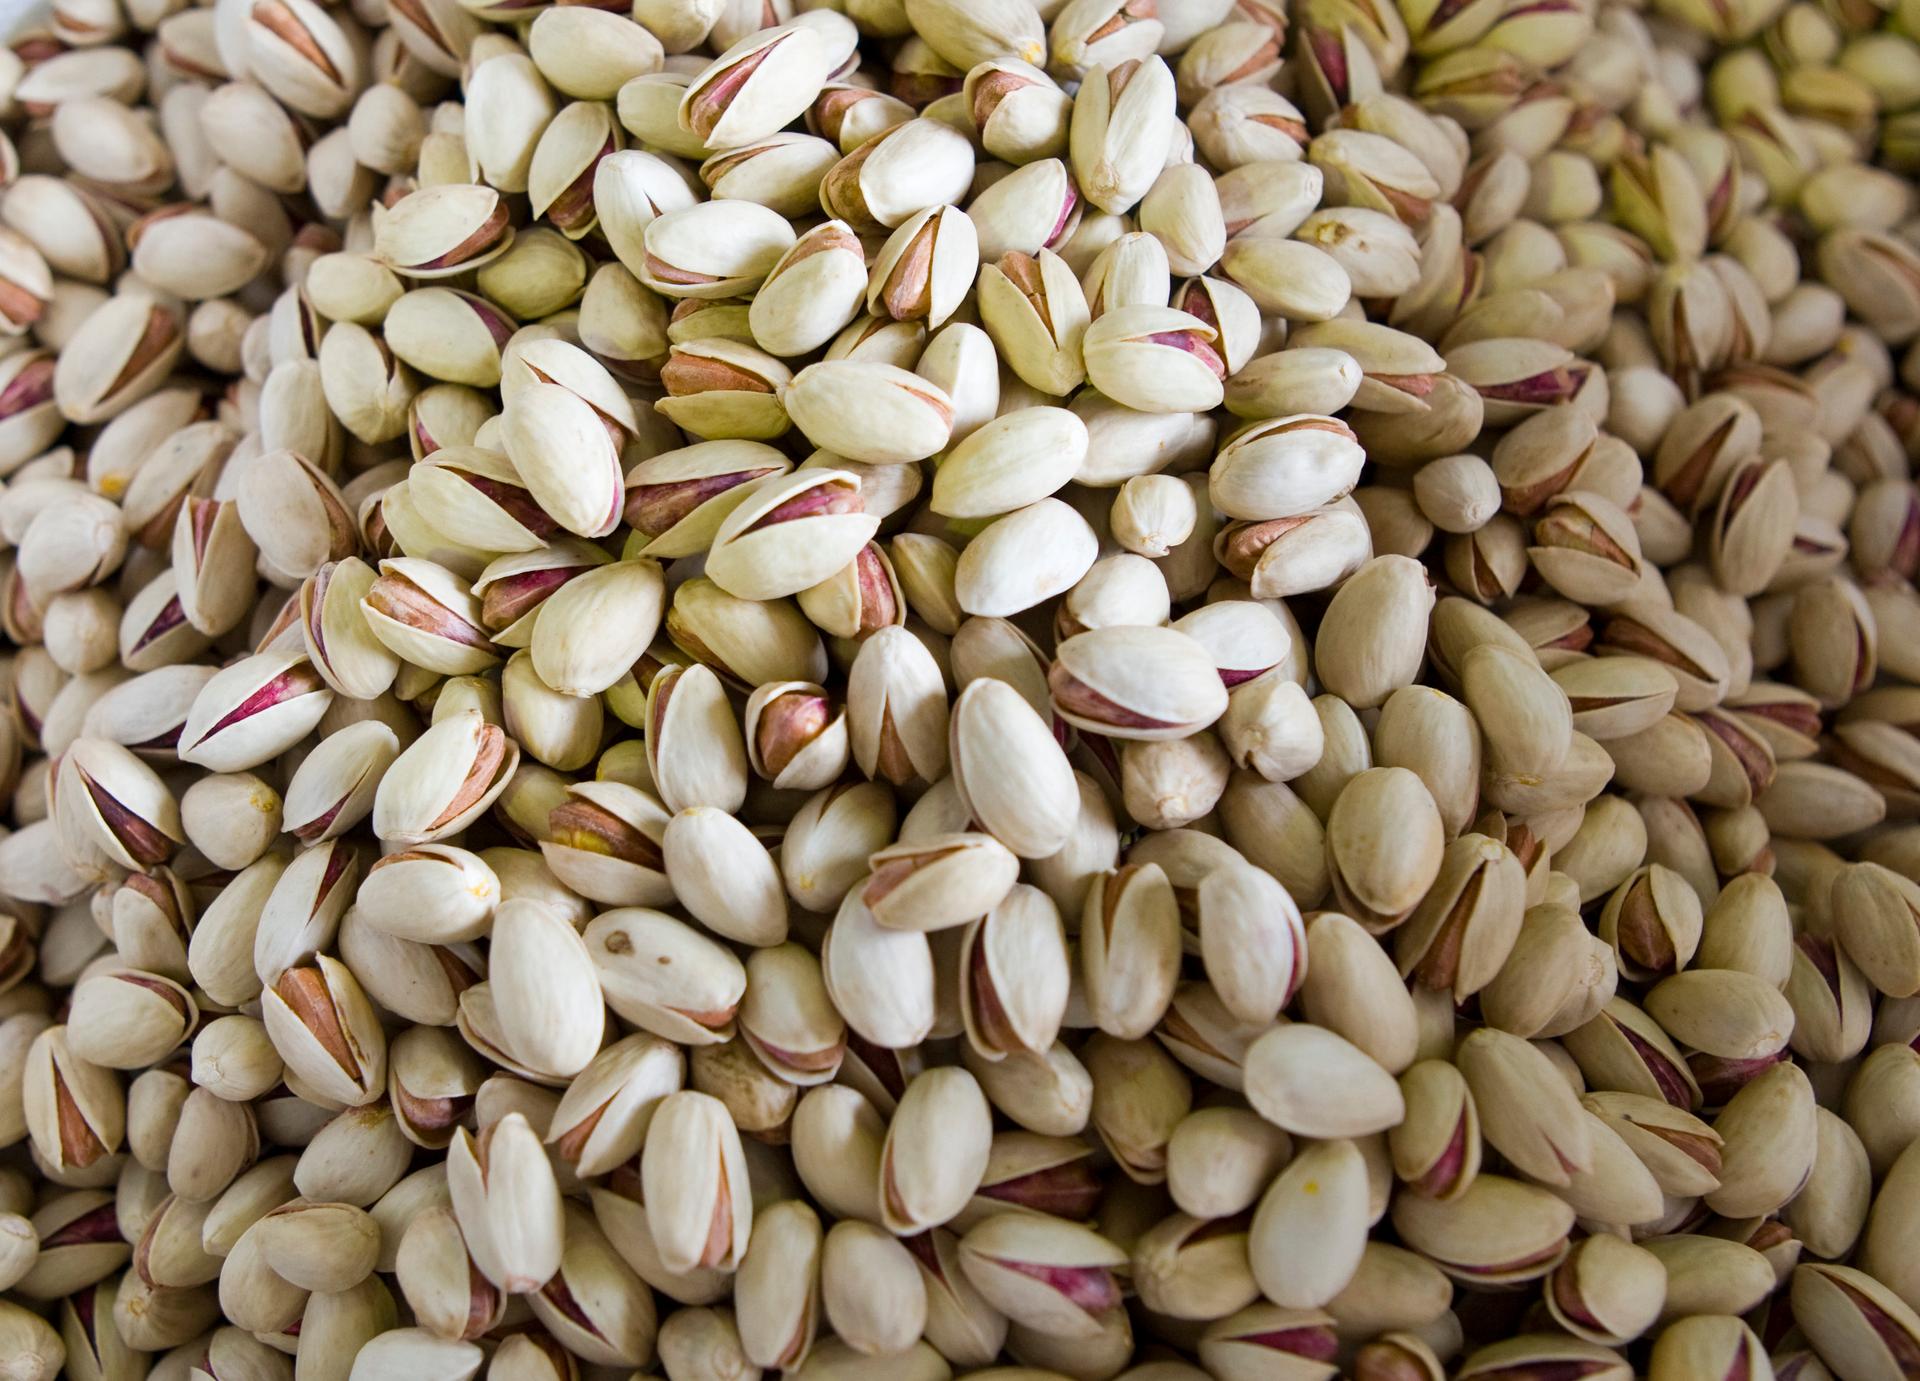 Pistachios are seen after sorting at a processing factory in Rafsanjan,1,000 kilometers southeast of Tehran September 23, 2008.